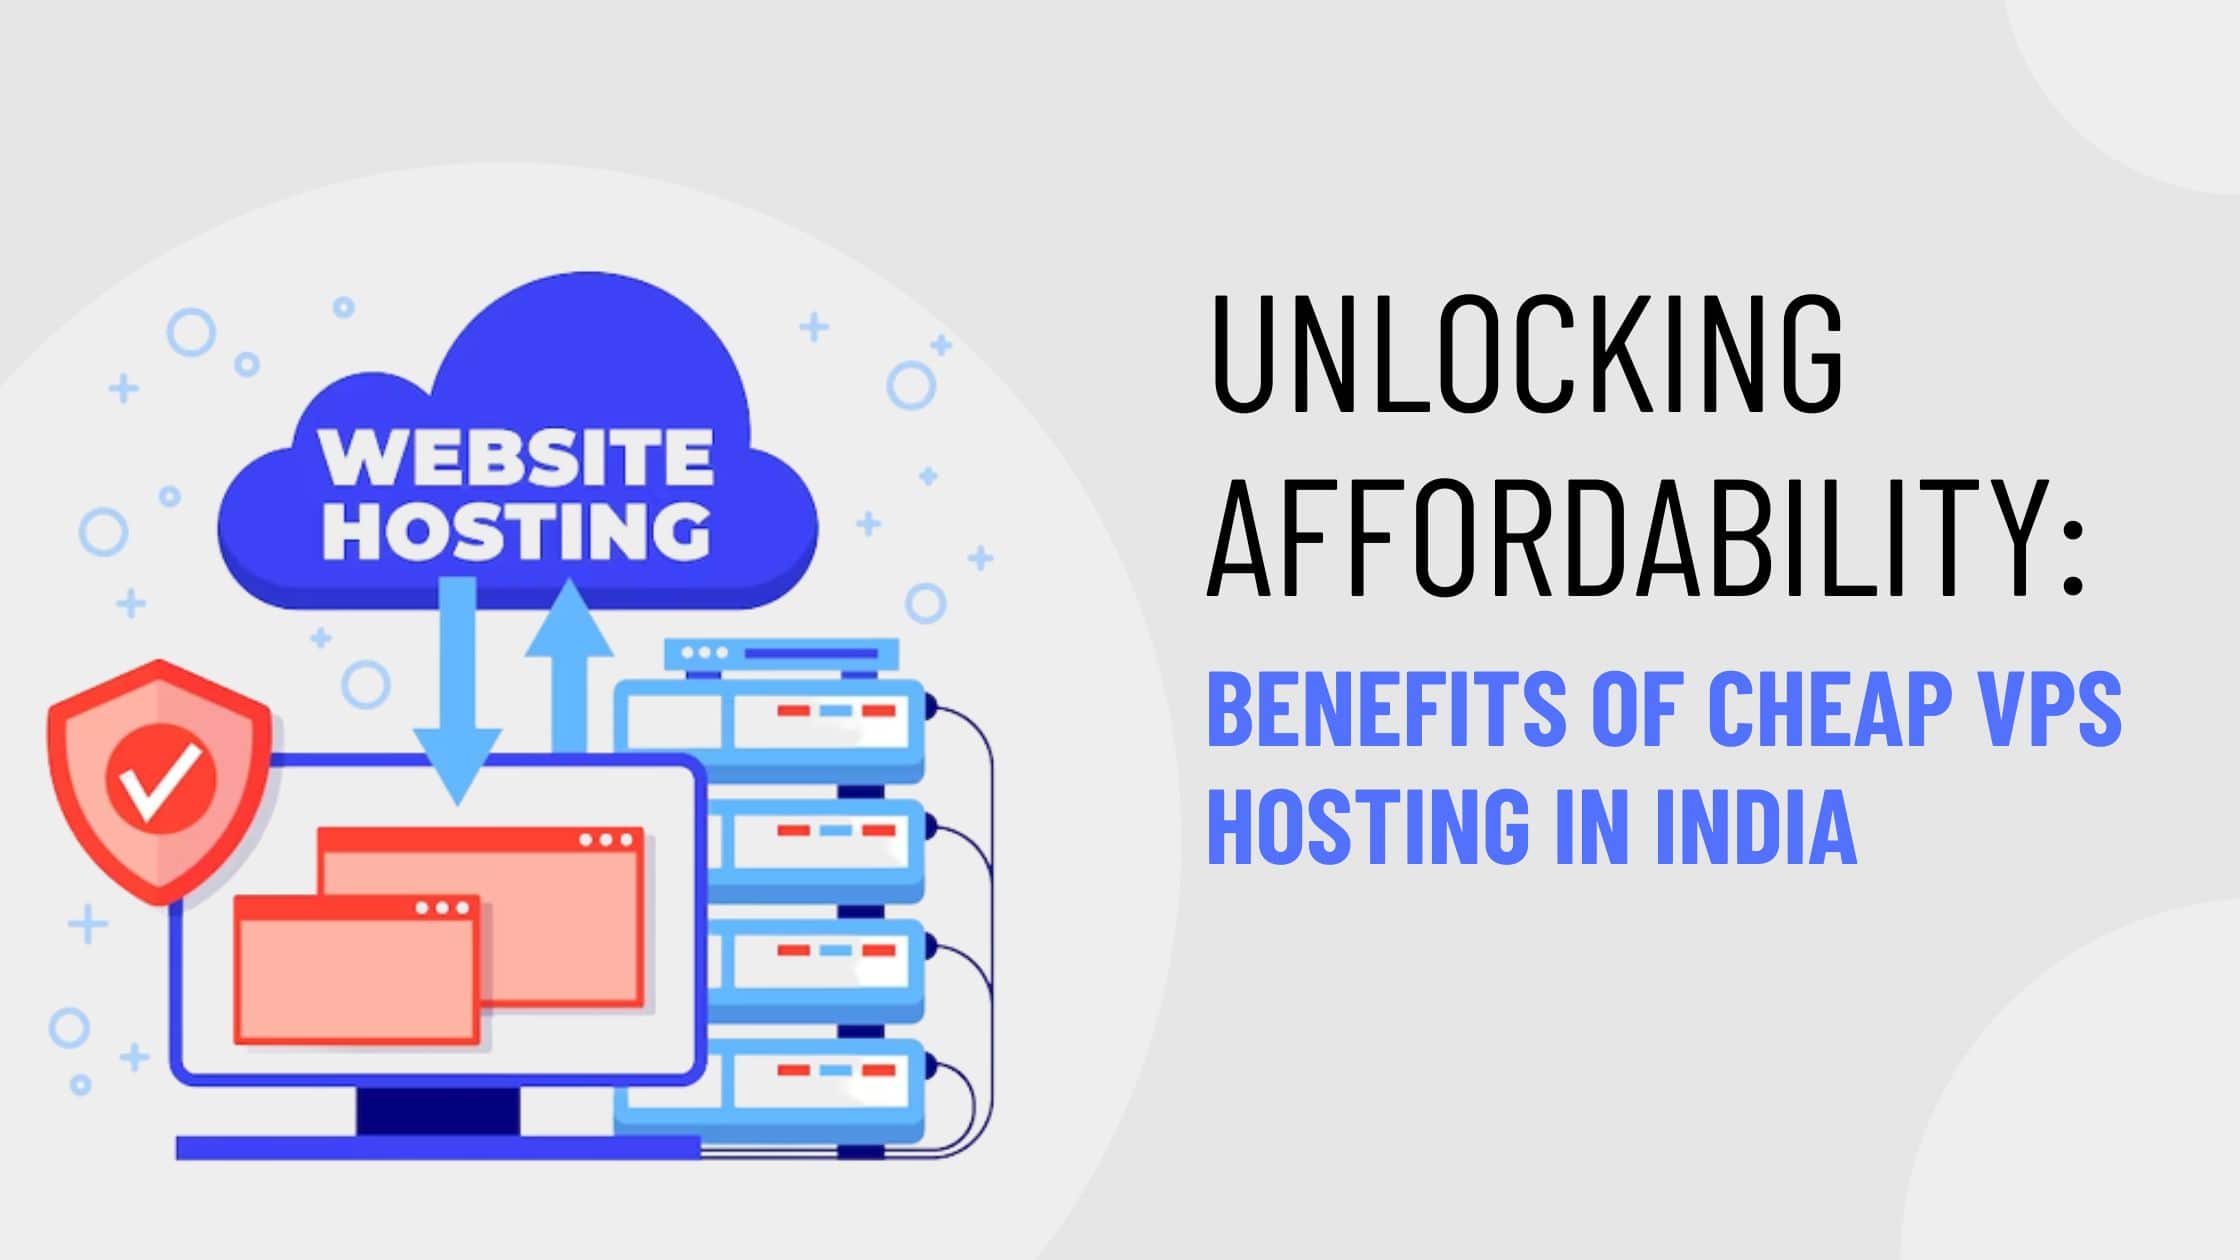 Unlocking Affordability Benefits of Cheap VPS Hosting in India